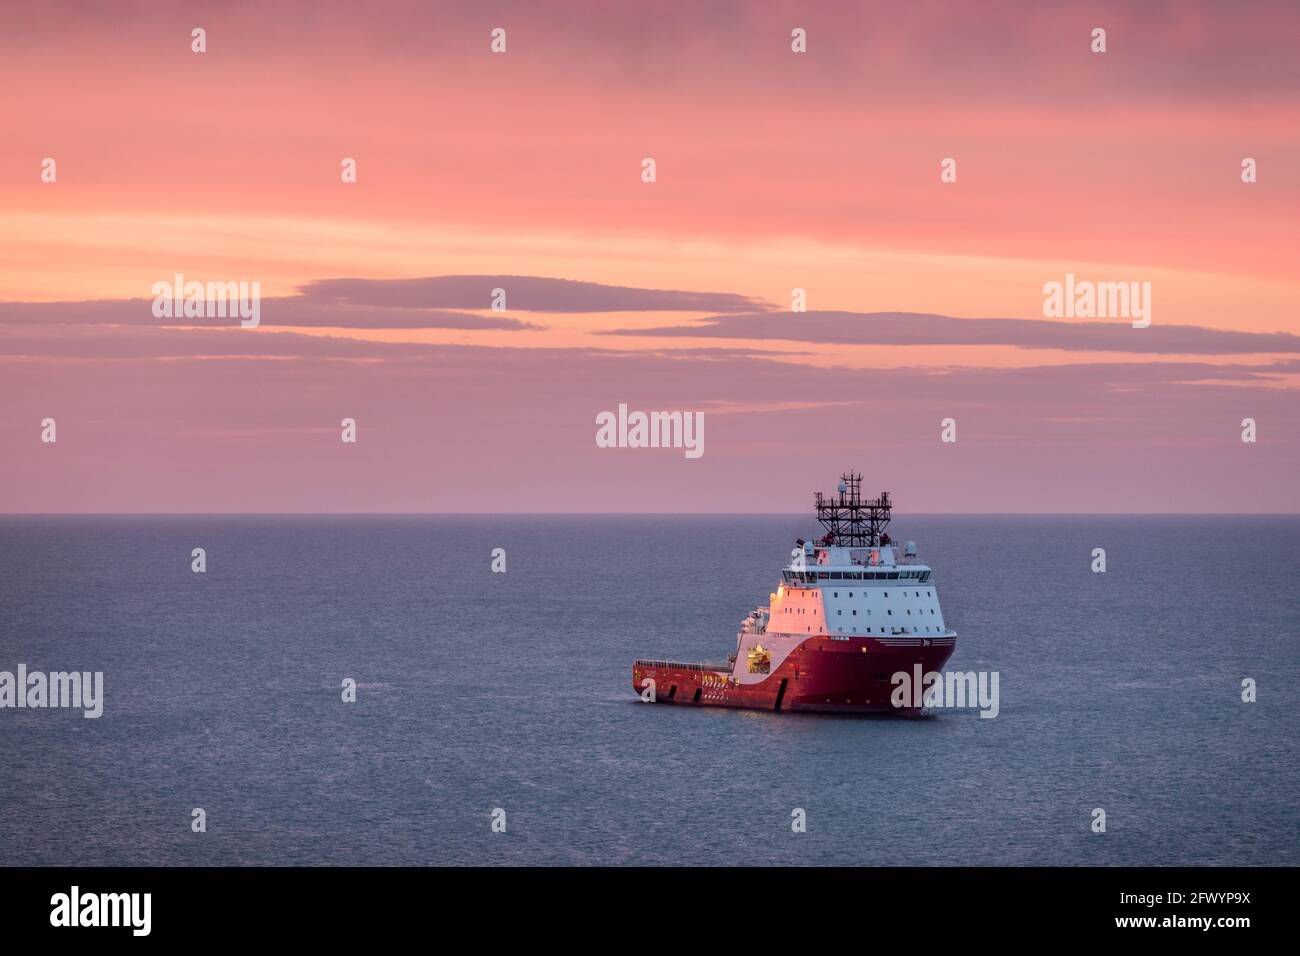 Myrtleville, Cork, Ireland. 25th May, 2021. Norwegian registered offshore supply ship Siam Diamond lies at anchor at dawn off Myrtleville, Co. Cork. The tug is one of the vessels taking part in the decommissioning of the Kinsale gas field.- Credit; David Creedon / Alamy Live News Stock Photo